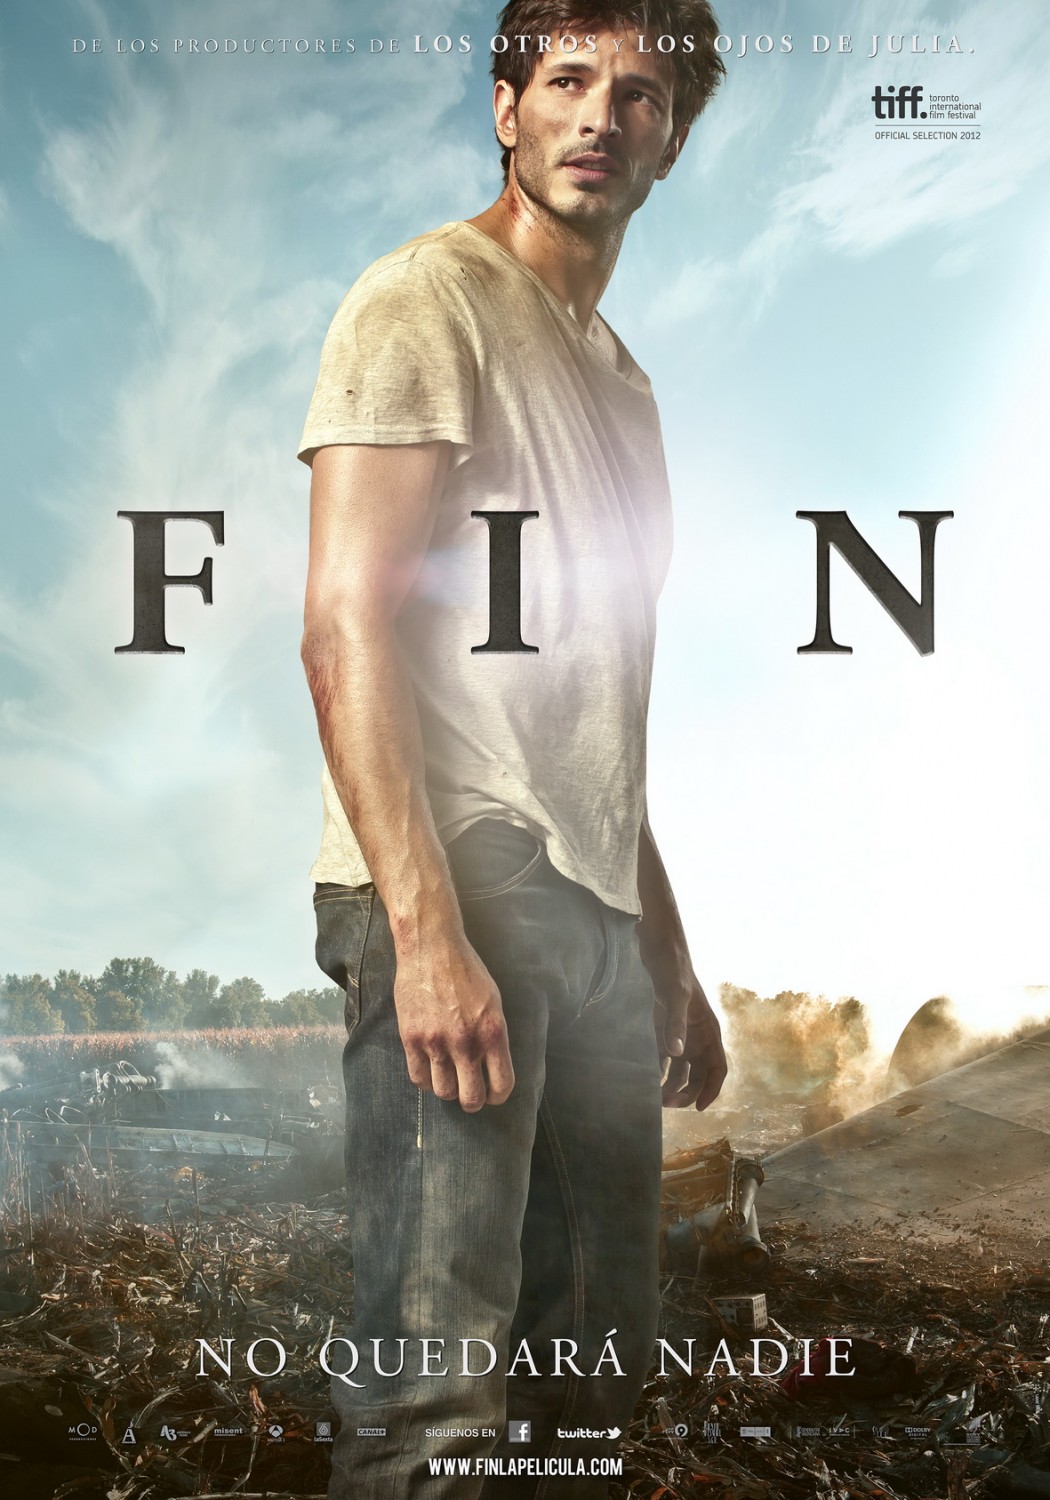 Extra Large Movie Poster Image for Fin (#8 of 8)